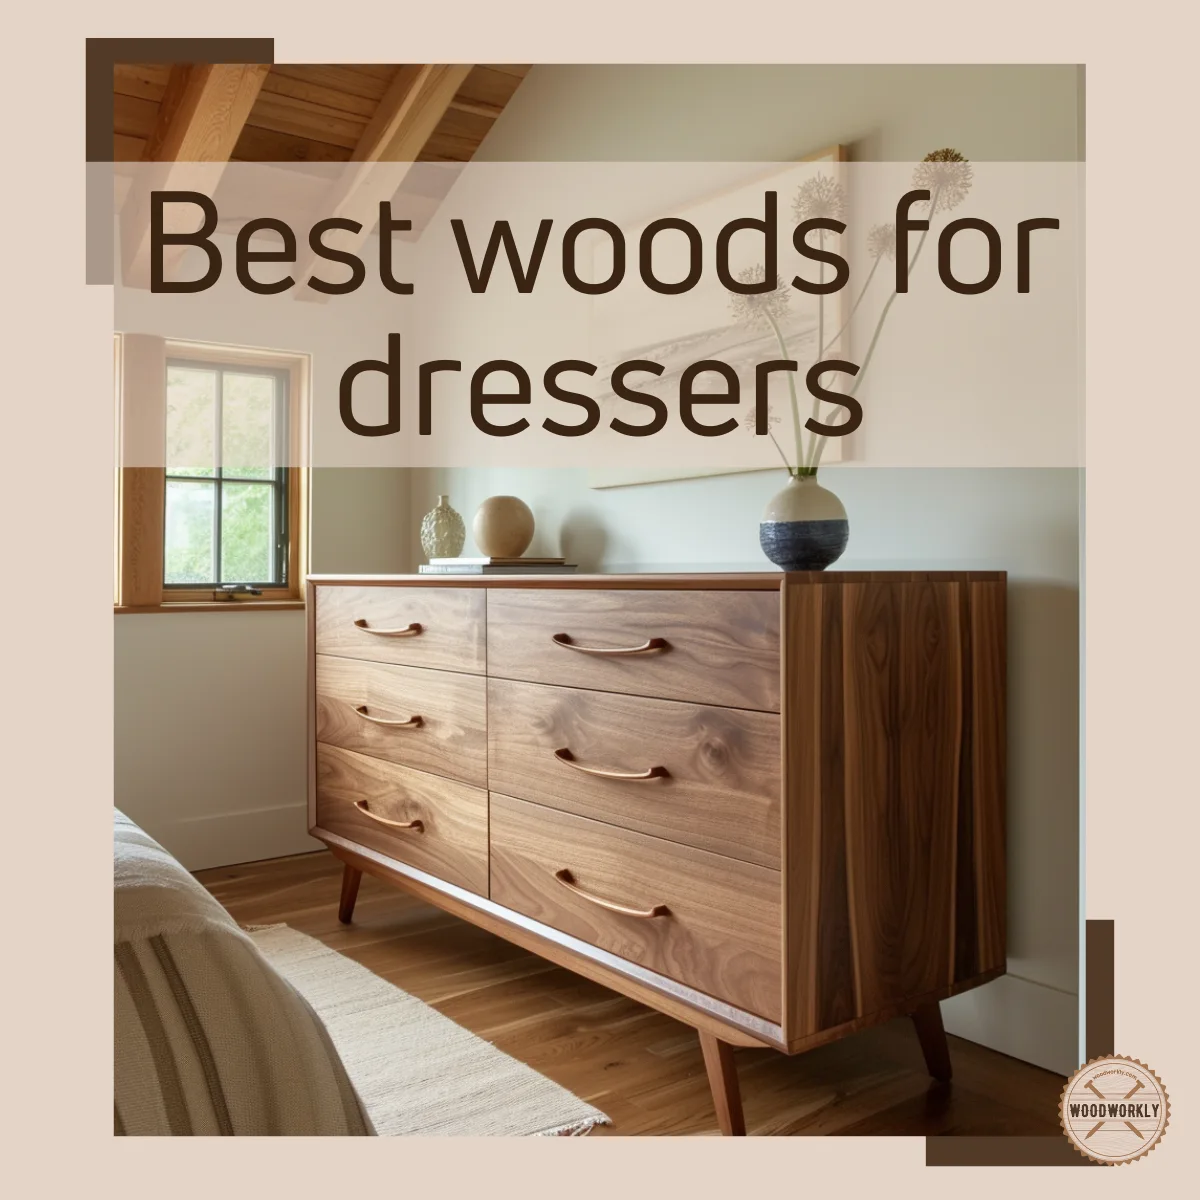 Best woods for dressers